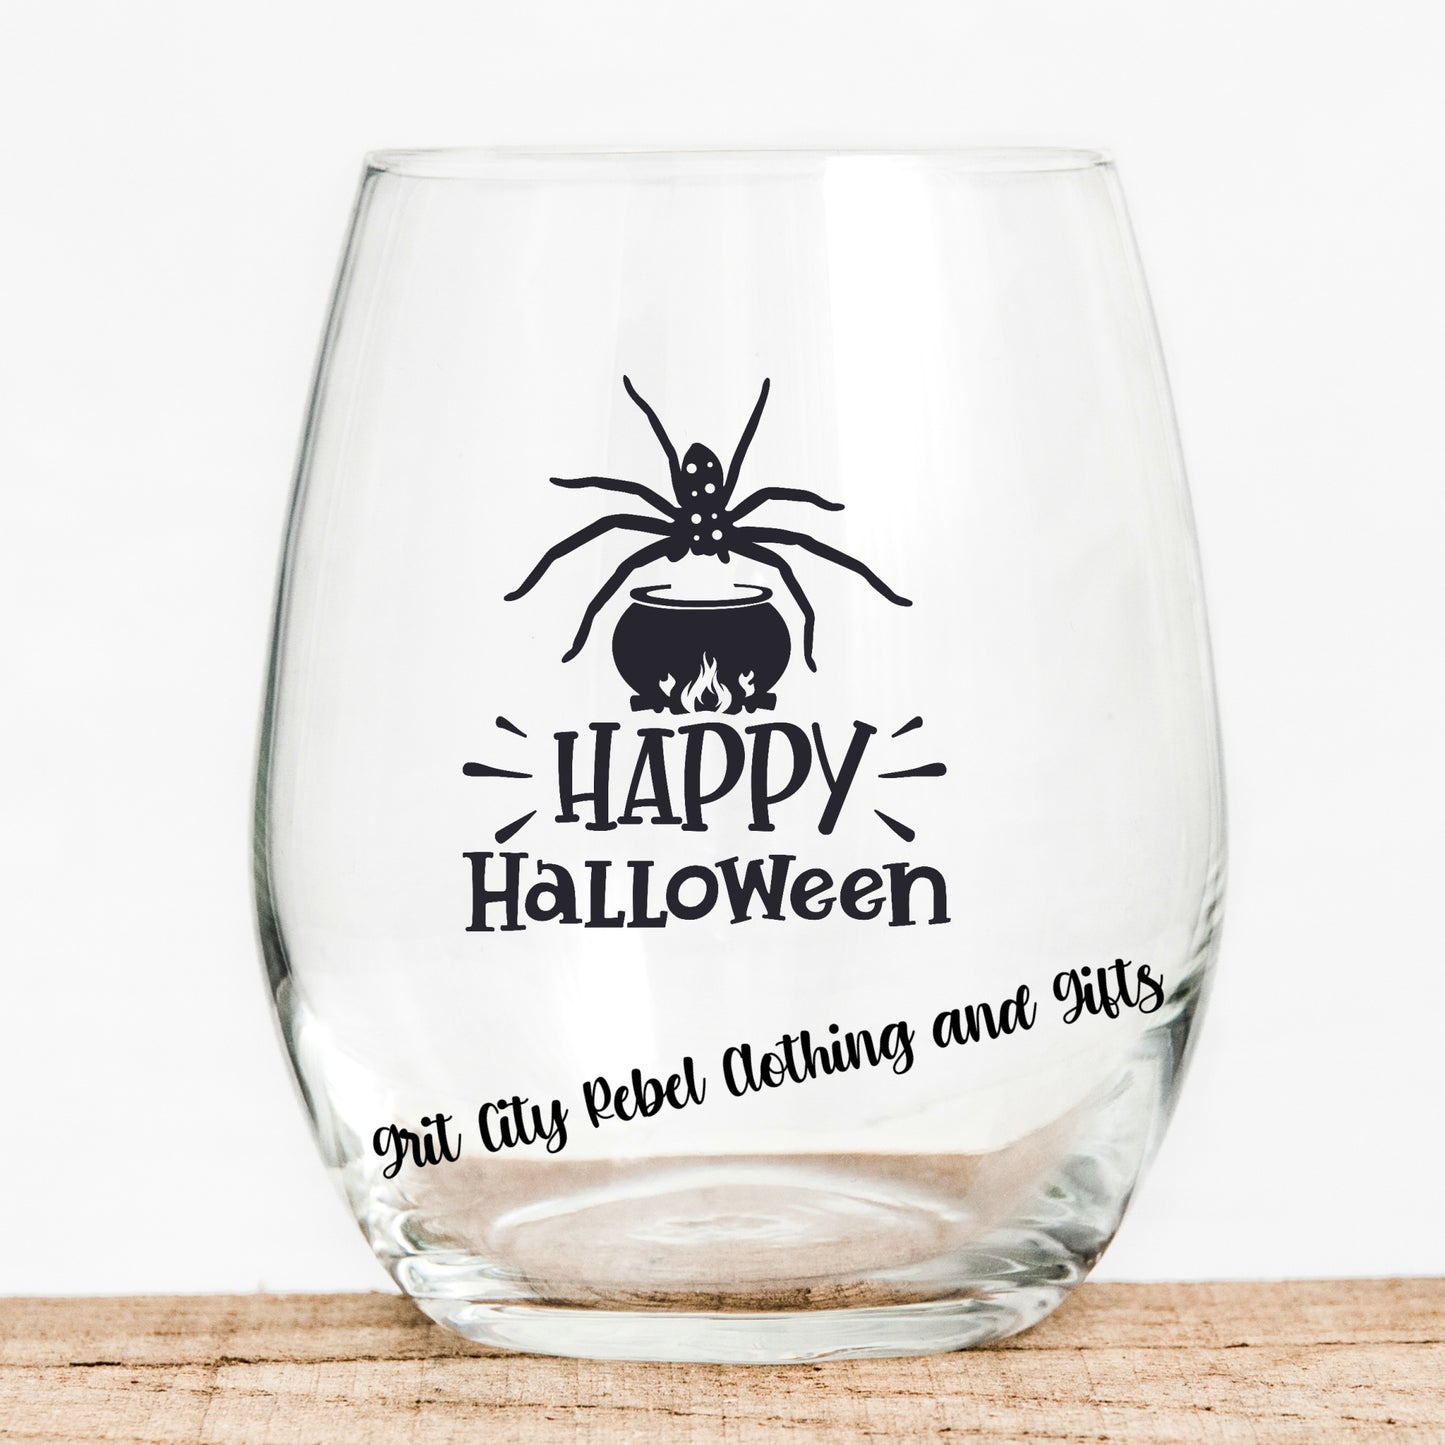 15oz Wine glass with the saying Happy Halloween with spider in black writing Grit City Rebel